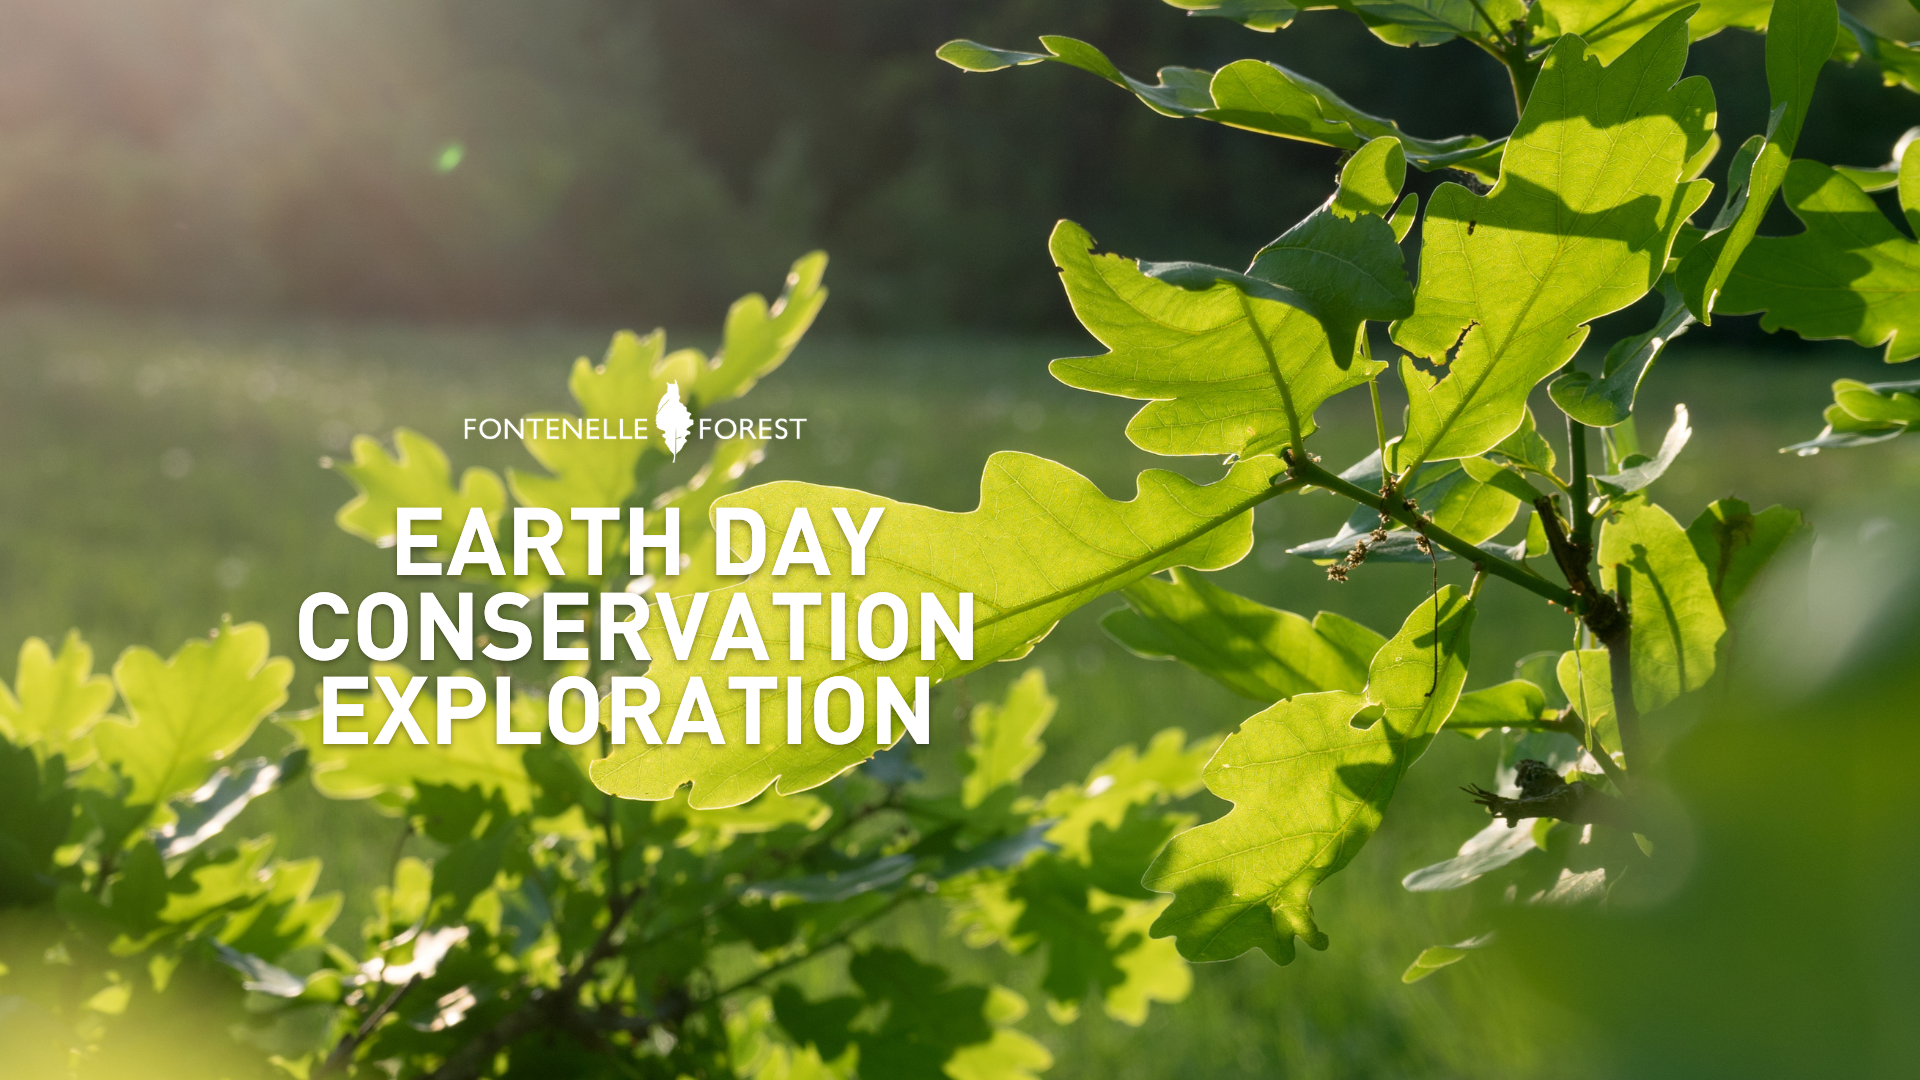 A picture of green leafy branches overlayed with the Fontenelle Forest logo and the words "Earth Day Conservation Exploration."